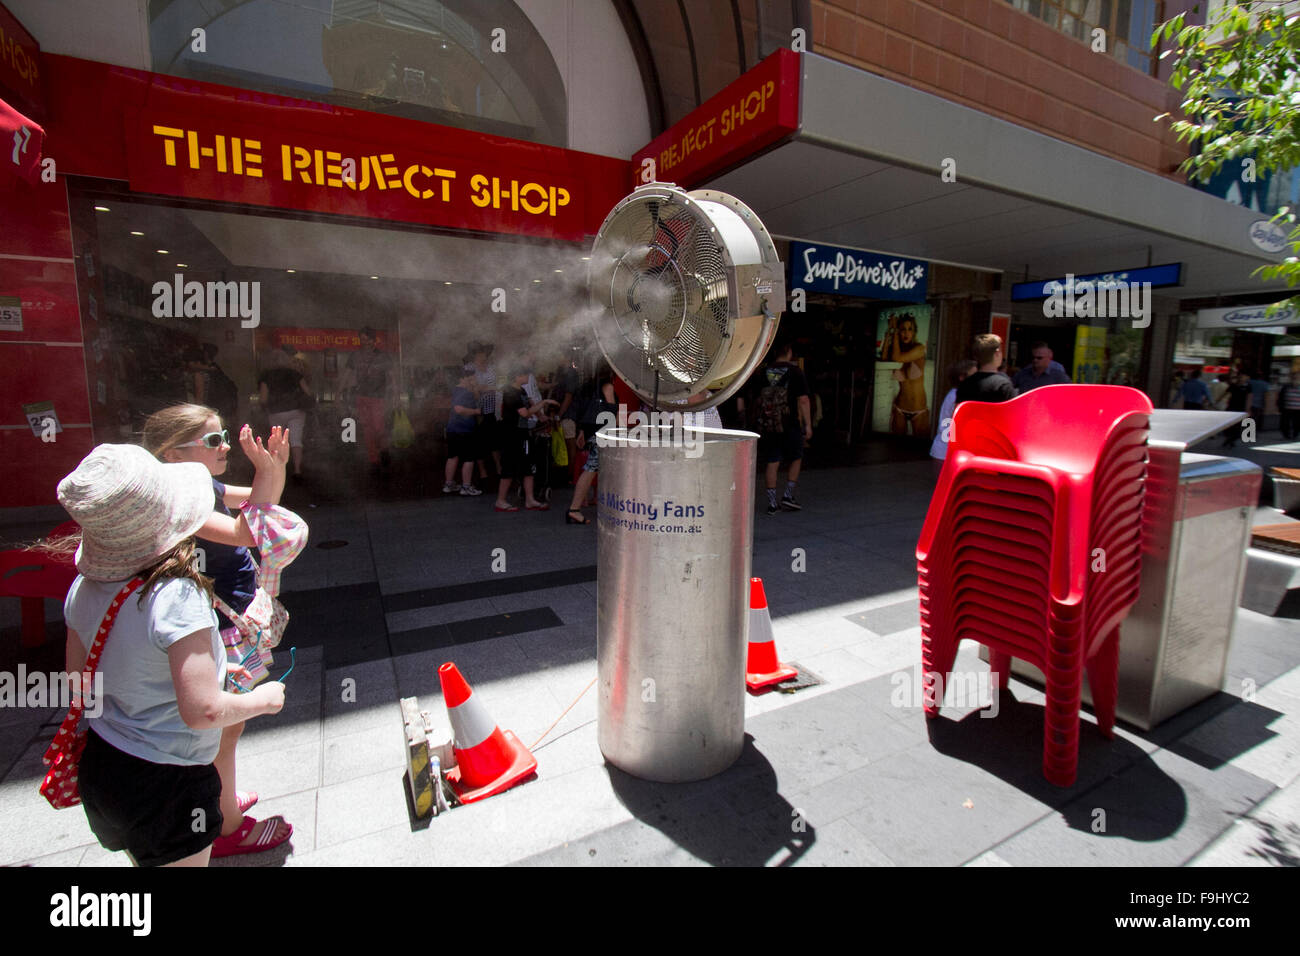 Adelaide Australia. 17th December 2015.People cool off from the oppressive heat in front of fans spraying cool mist during a heatwave in Adelaide town centre as temperatures climb to 43 degrees celsius Credit:  amer ghazzal/Alamy Live News Stock Photo